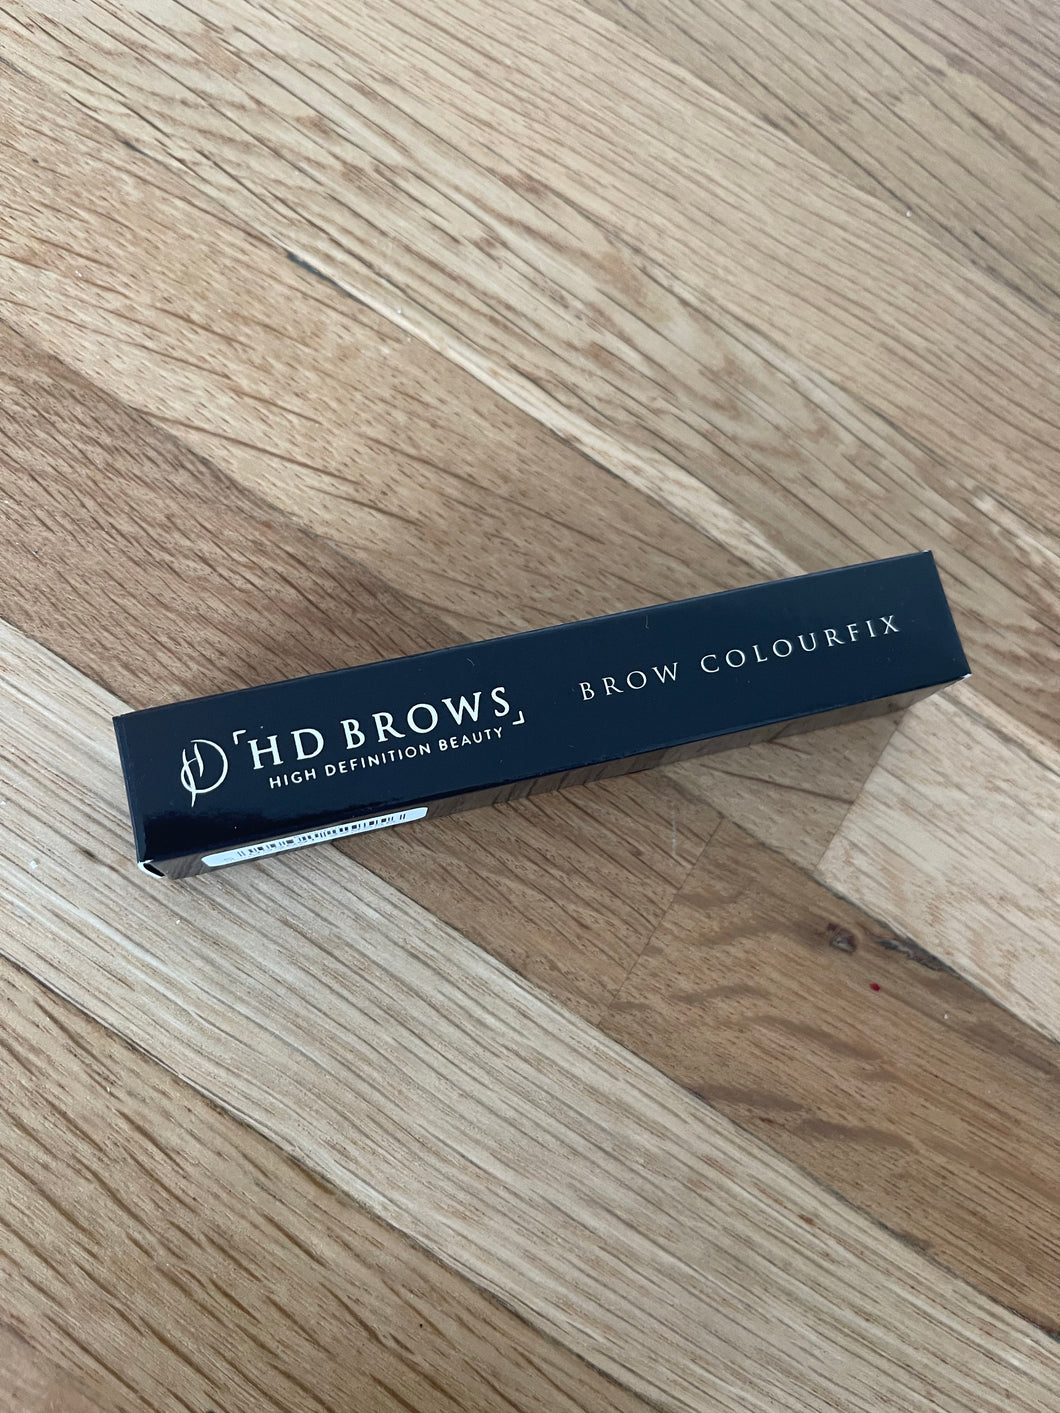 HD BROWS “Bombshell” Colourfix